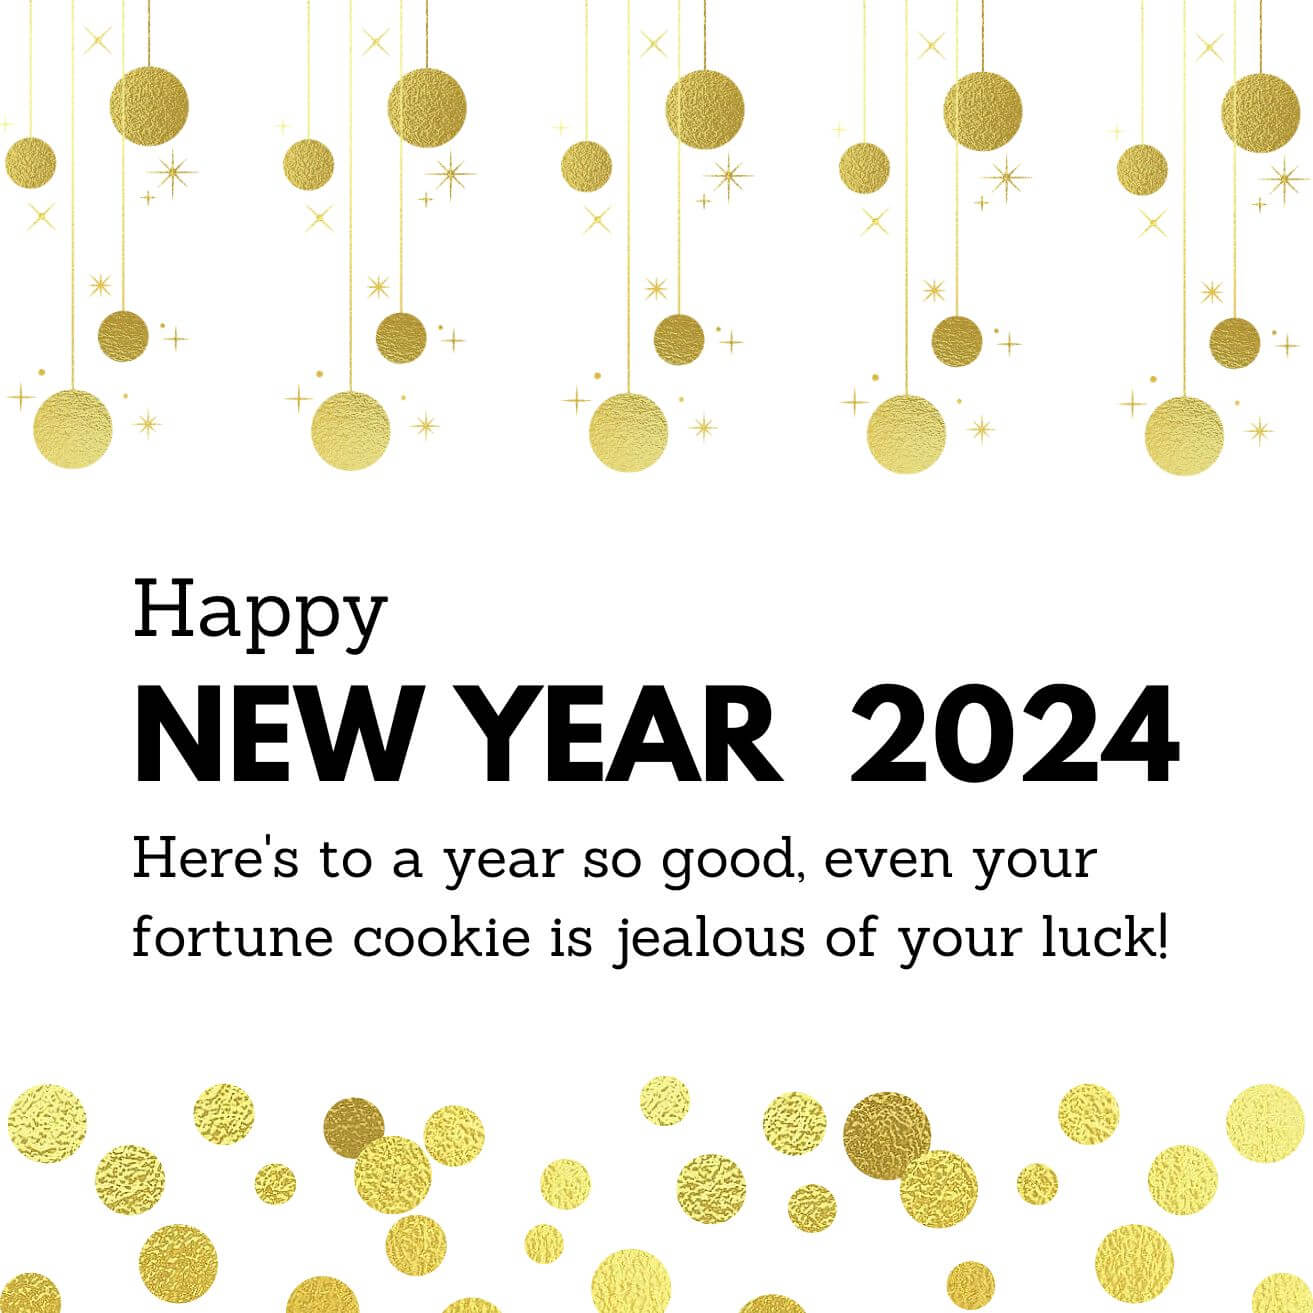 Funny Happy New Year Wishes And Greetings 2024